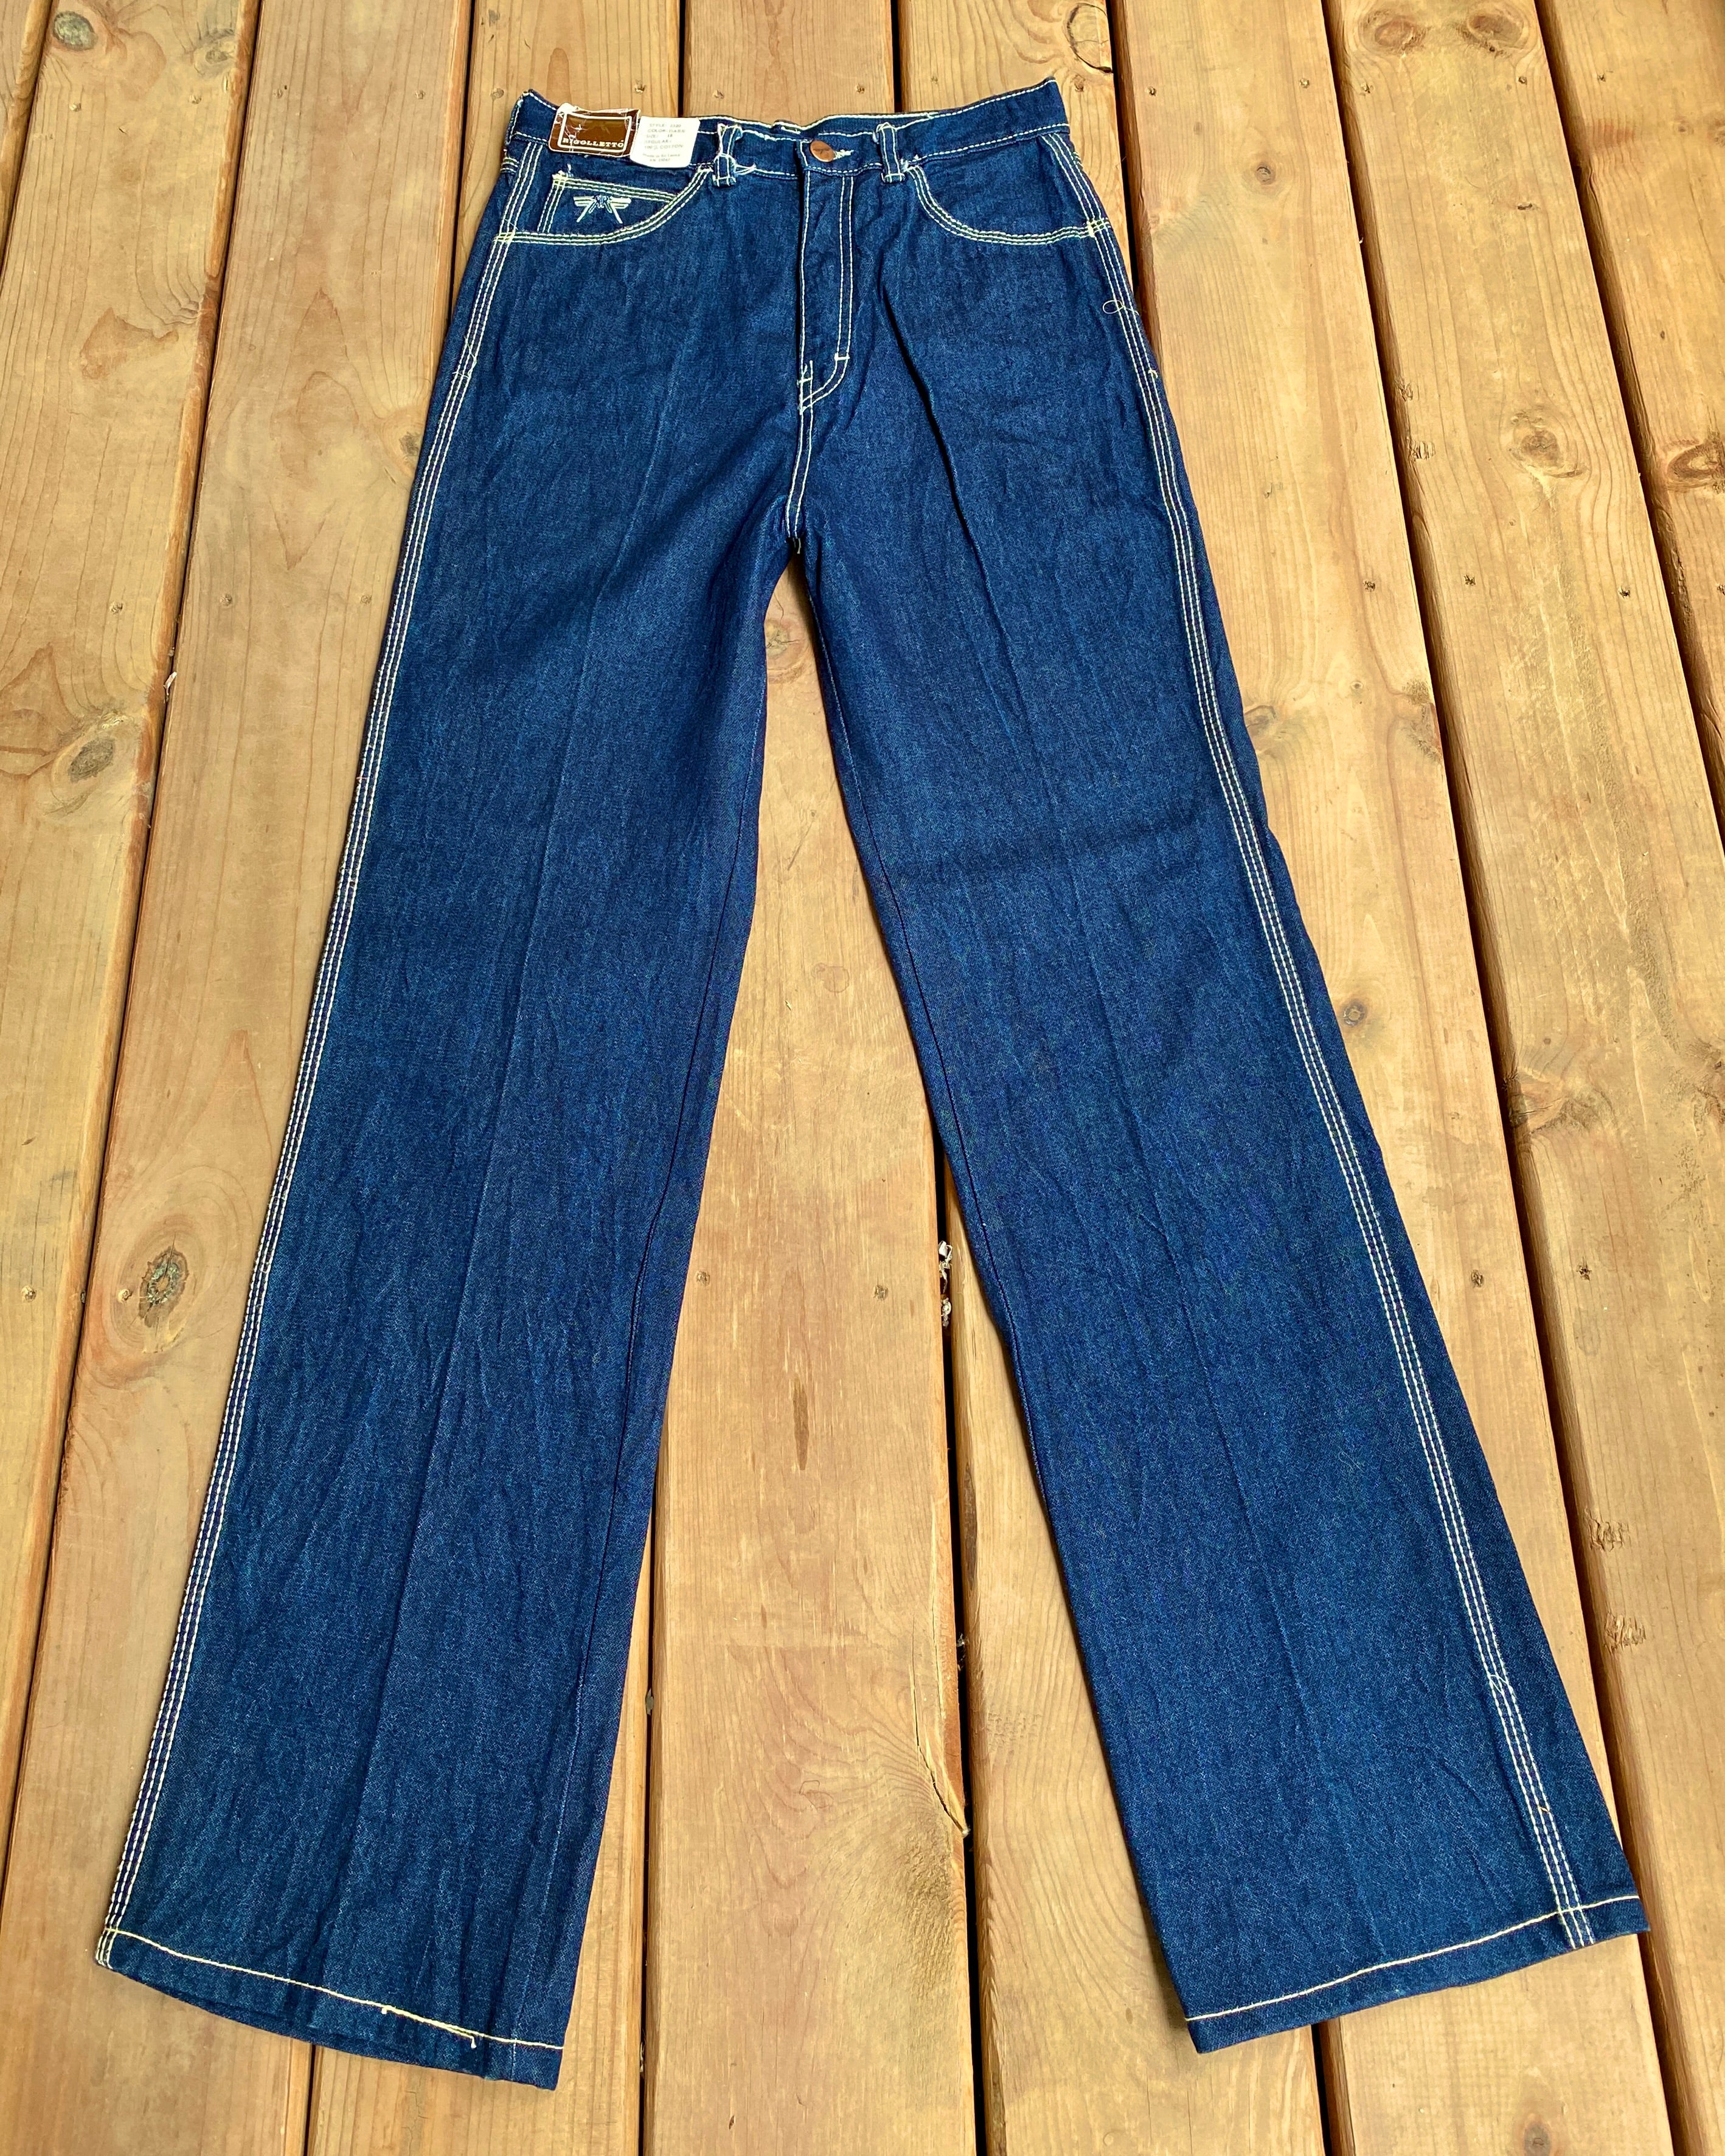 Vintage Deadstock NWT 1970s High Waisted Rigolletto Raw Denim Jeans size 28